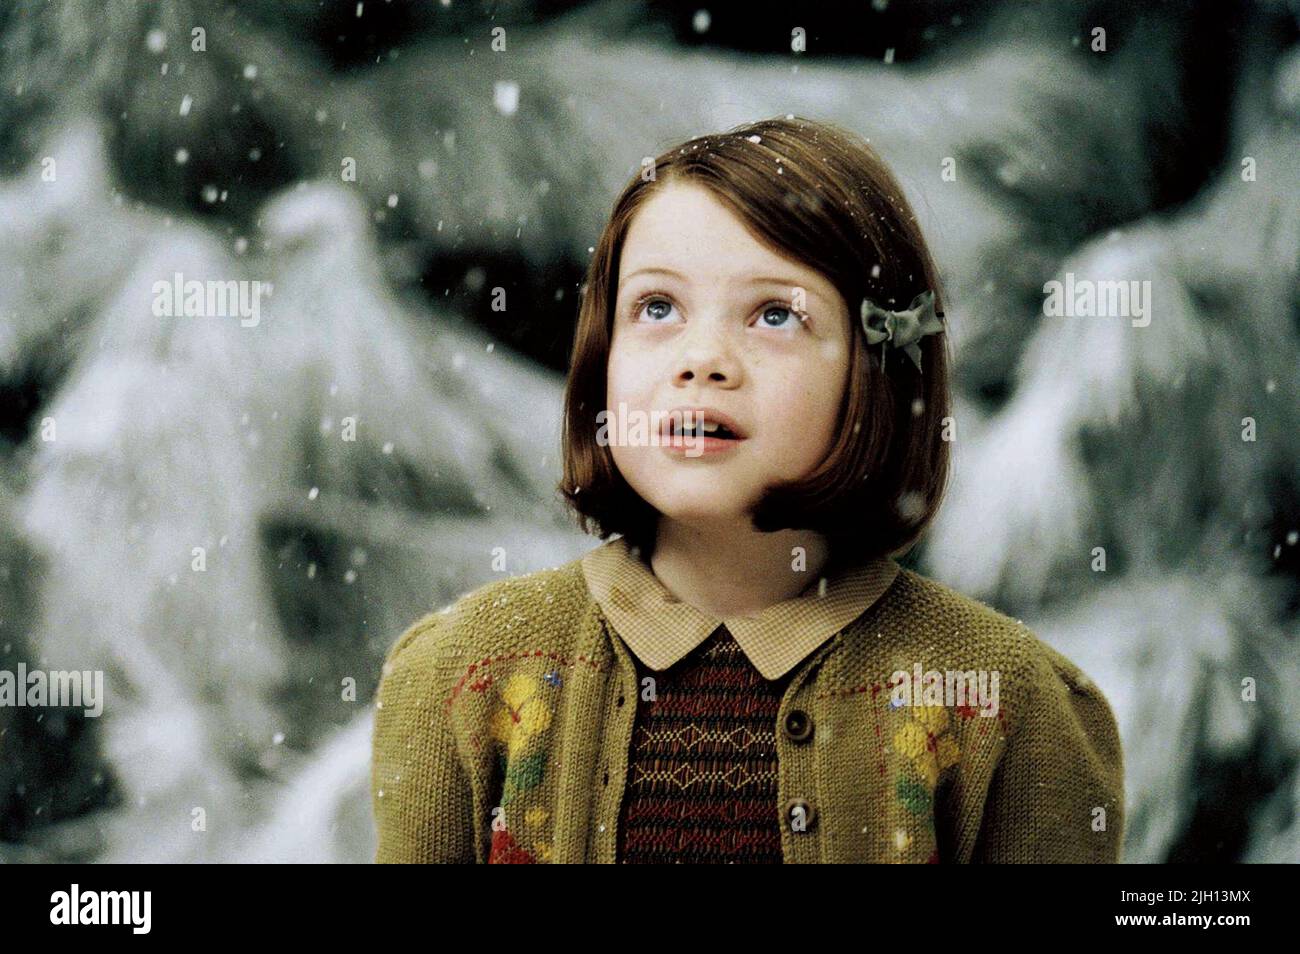 GEORGIE HENLEY, THE CHRONICLES OF NARNIA: THE LION  THE WITCH AND THE WARDROBE, 2005 Stock Photo